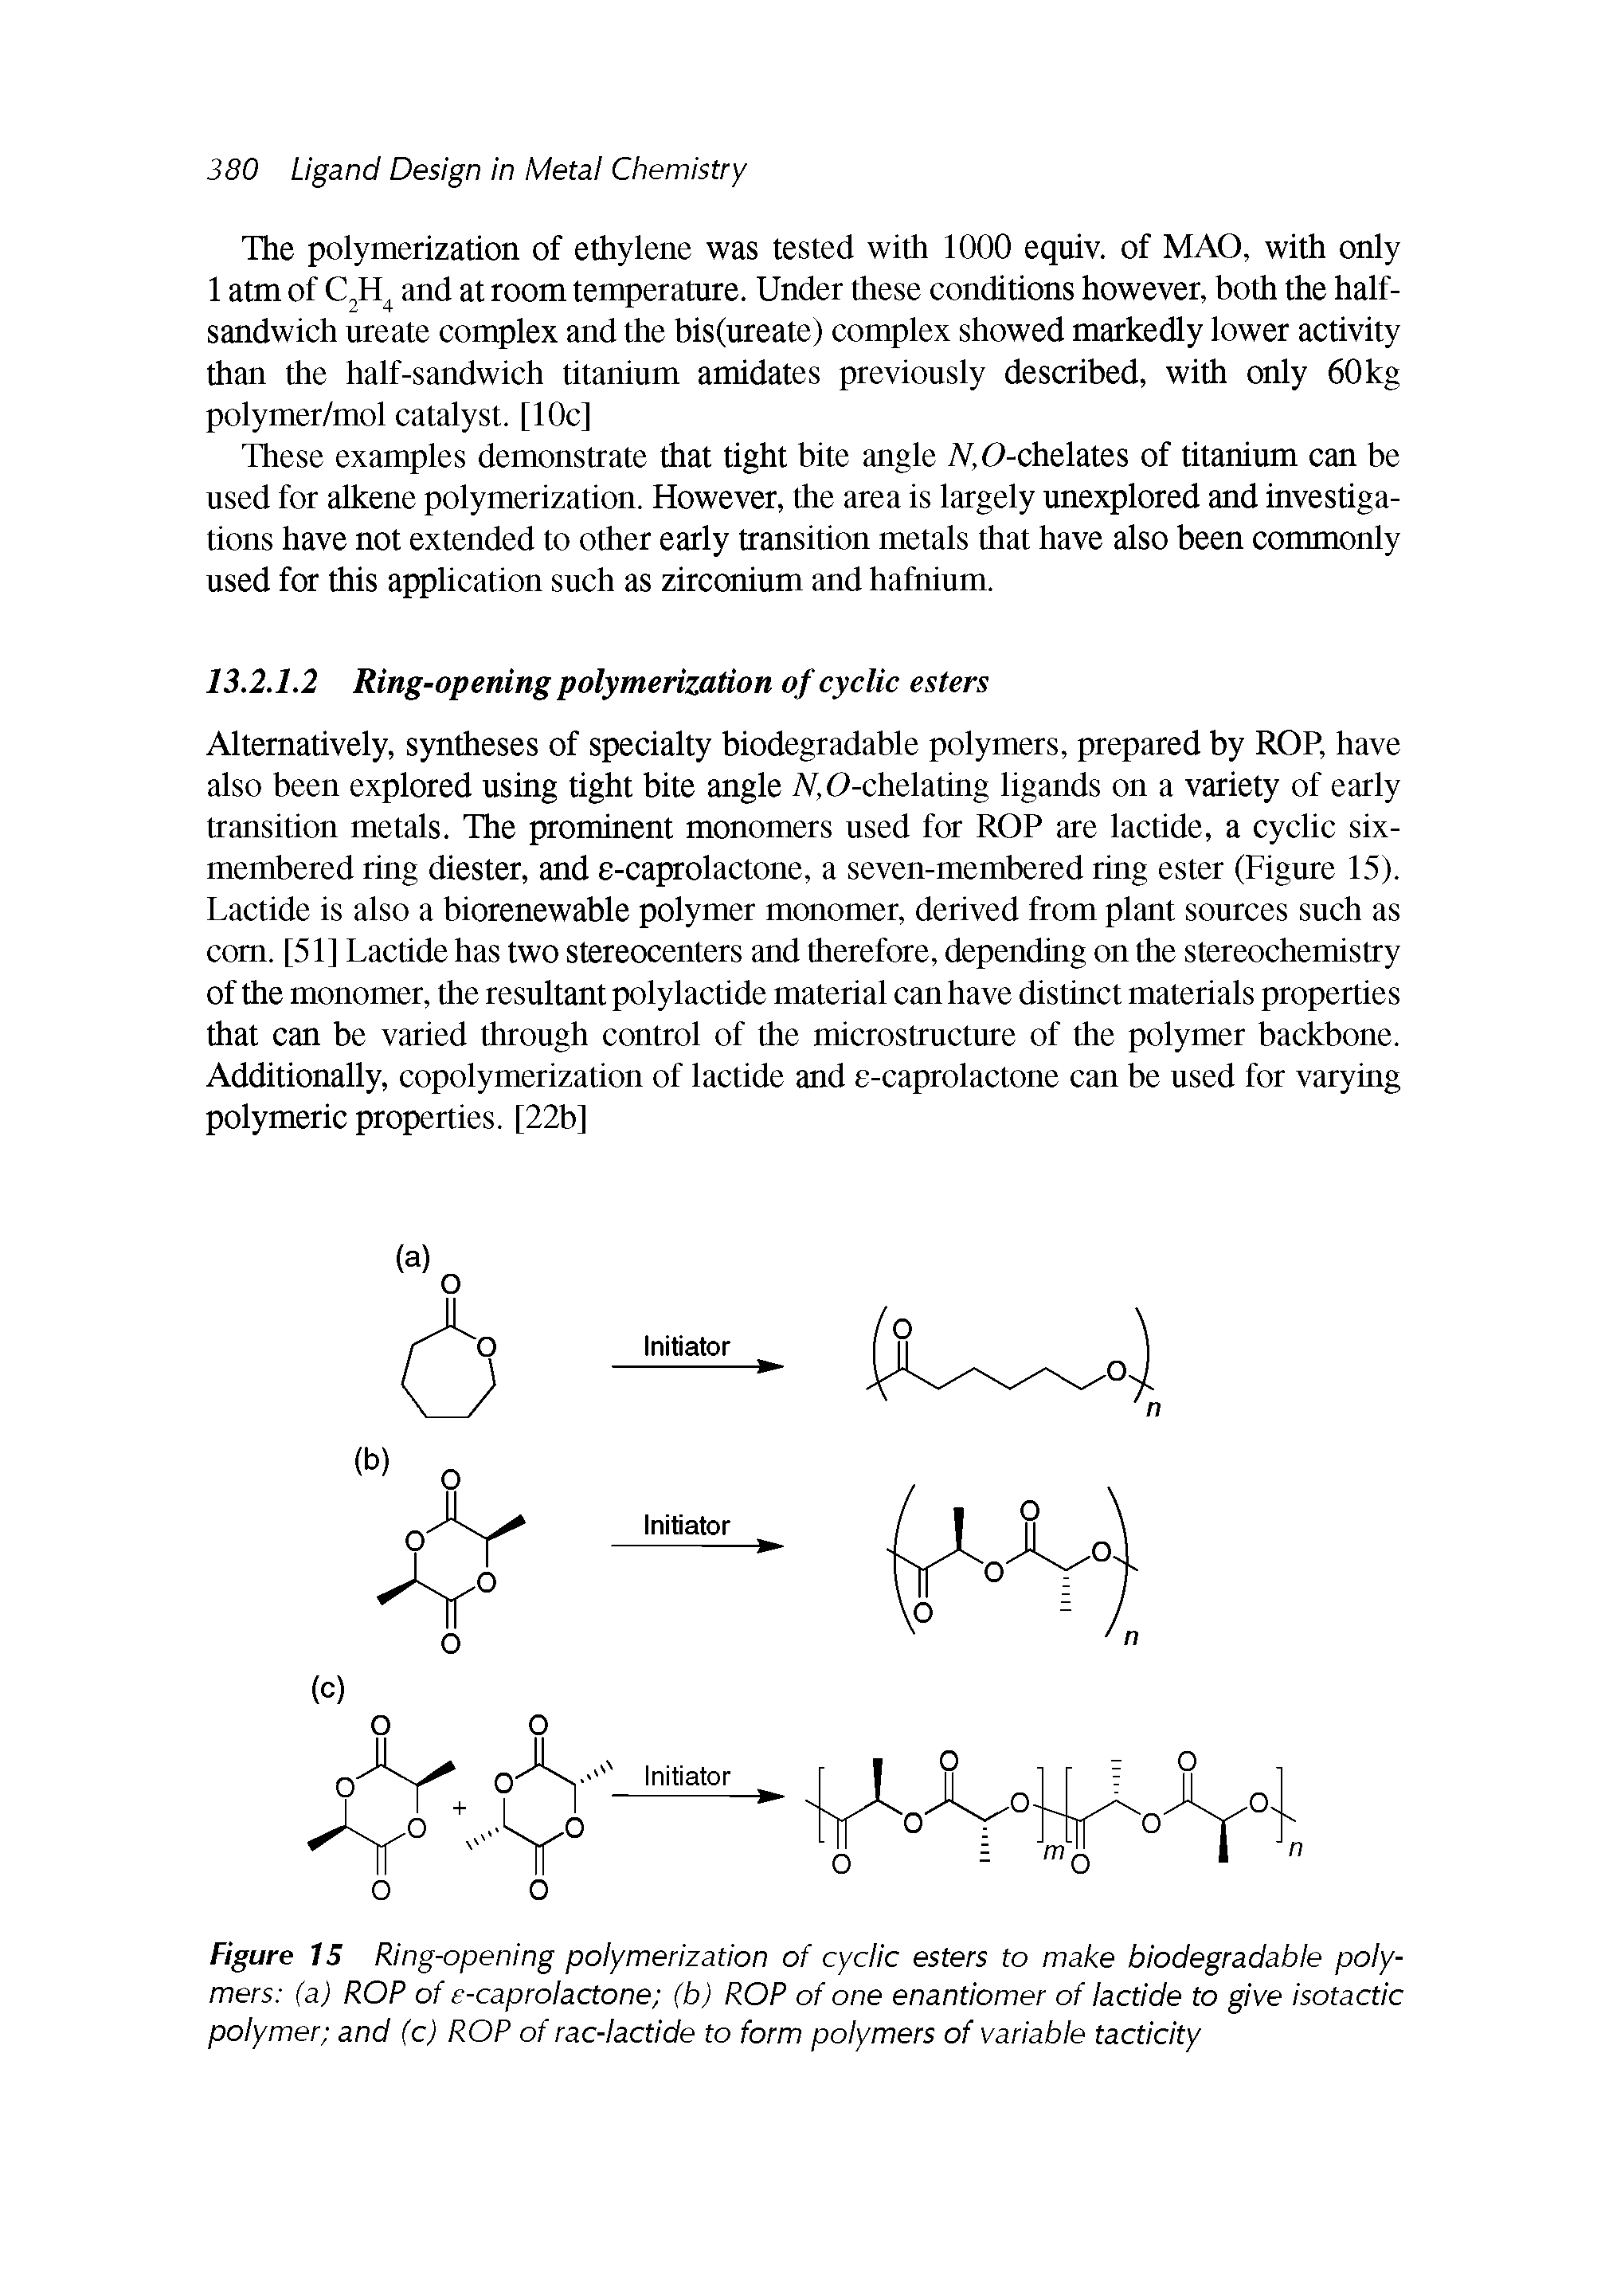 Figure 15 Ring-opening polymerization of cyclic esters to make biodegradable polymers (a) ROP of e-caprolactone (b) ROP of one enantiomer of lactide to give isotactic polymer and (c) ROP of rac-lactide to form polymers of variable tacticity...